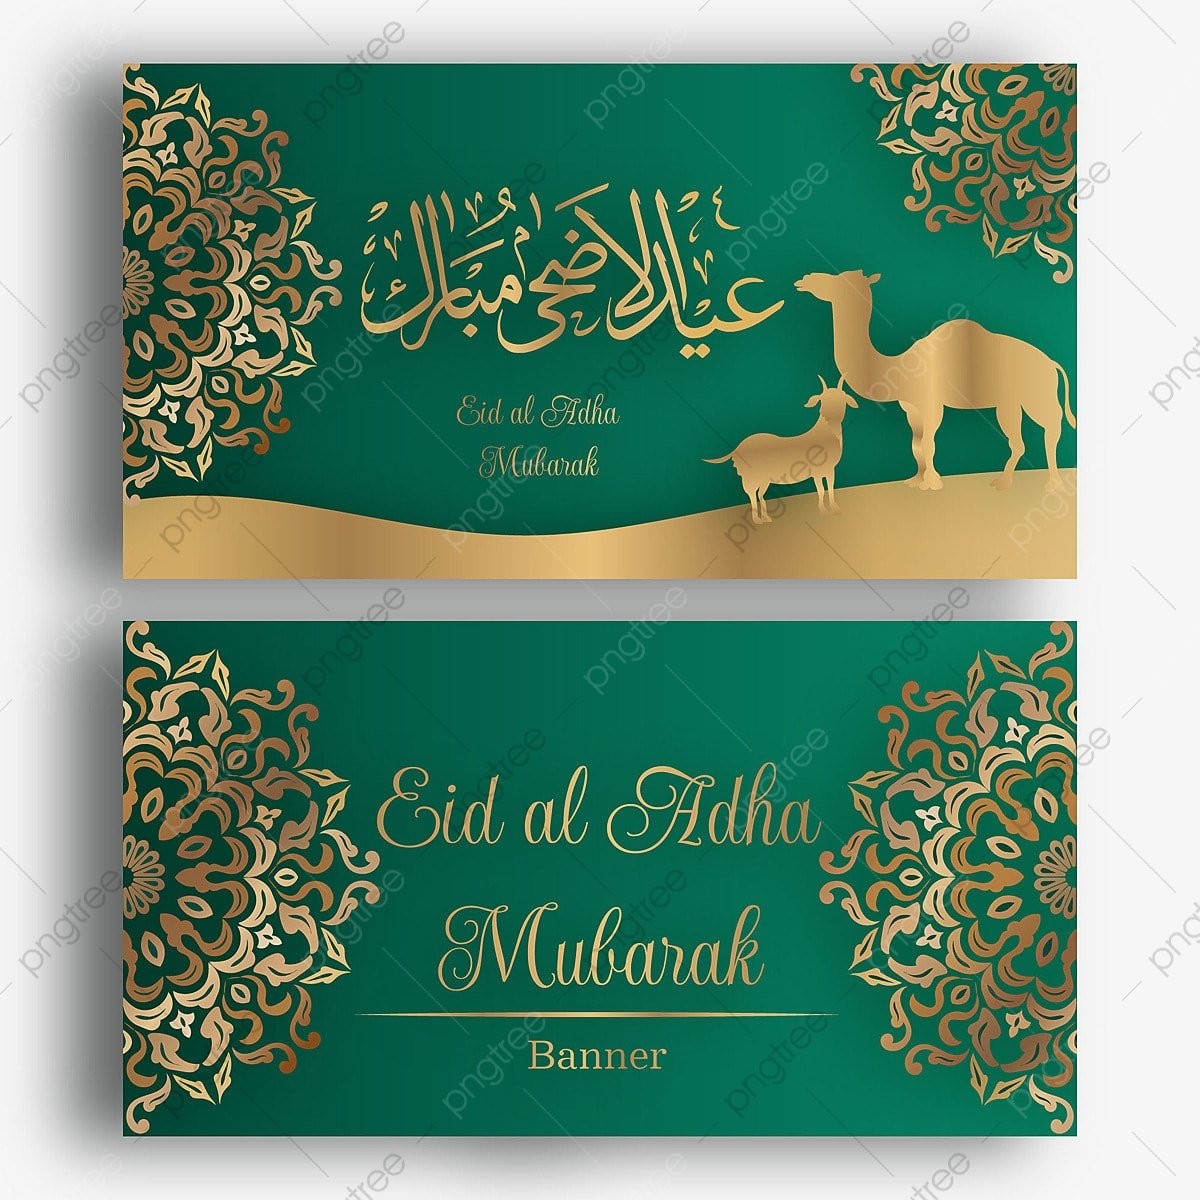 pngtree-eid-al-adha-banner-and-islamic-background-template-png-image_8067054 (1).png